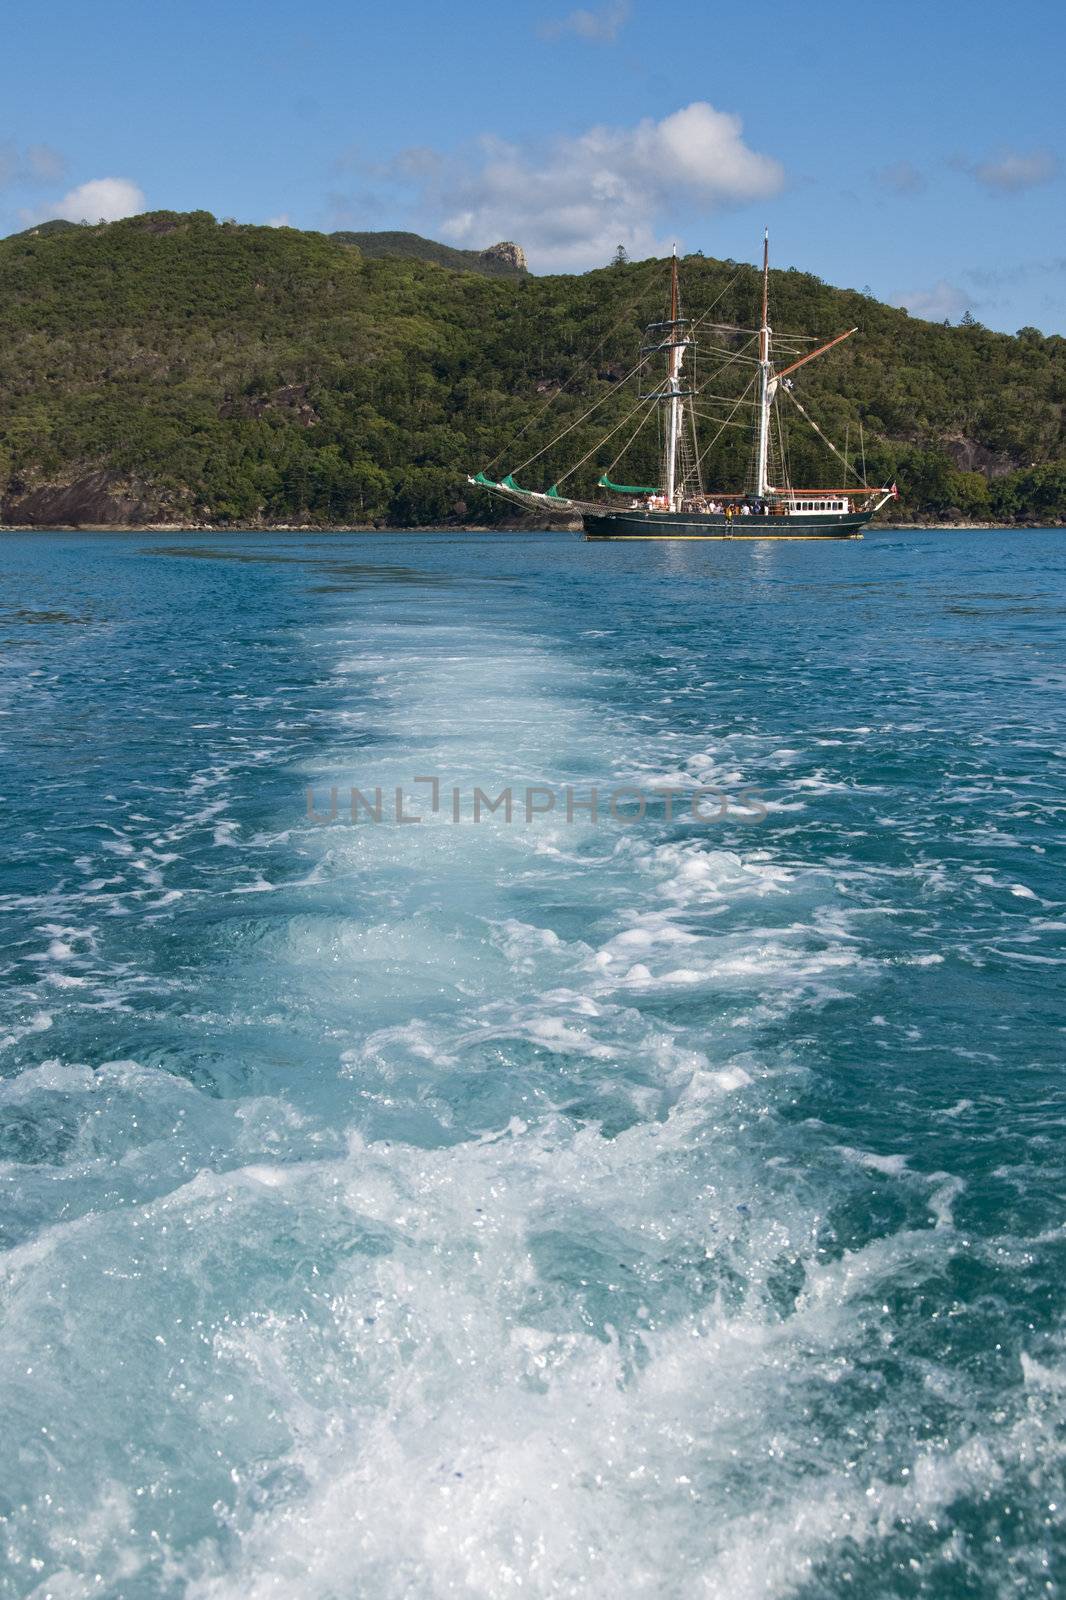 Sailing the Whitsundays, Queensland, Australia, August 2009 by jovannig